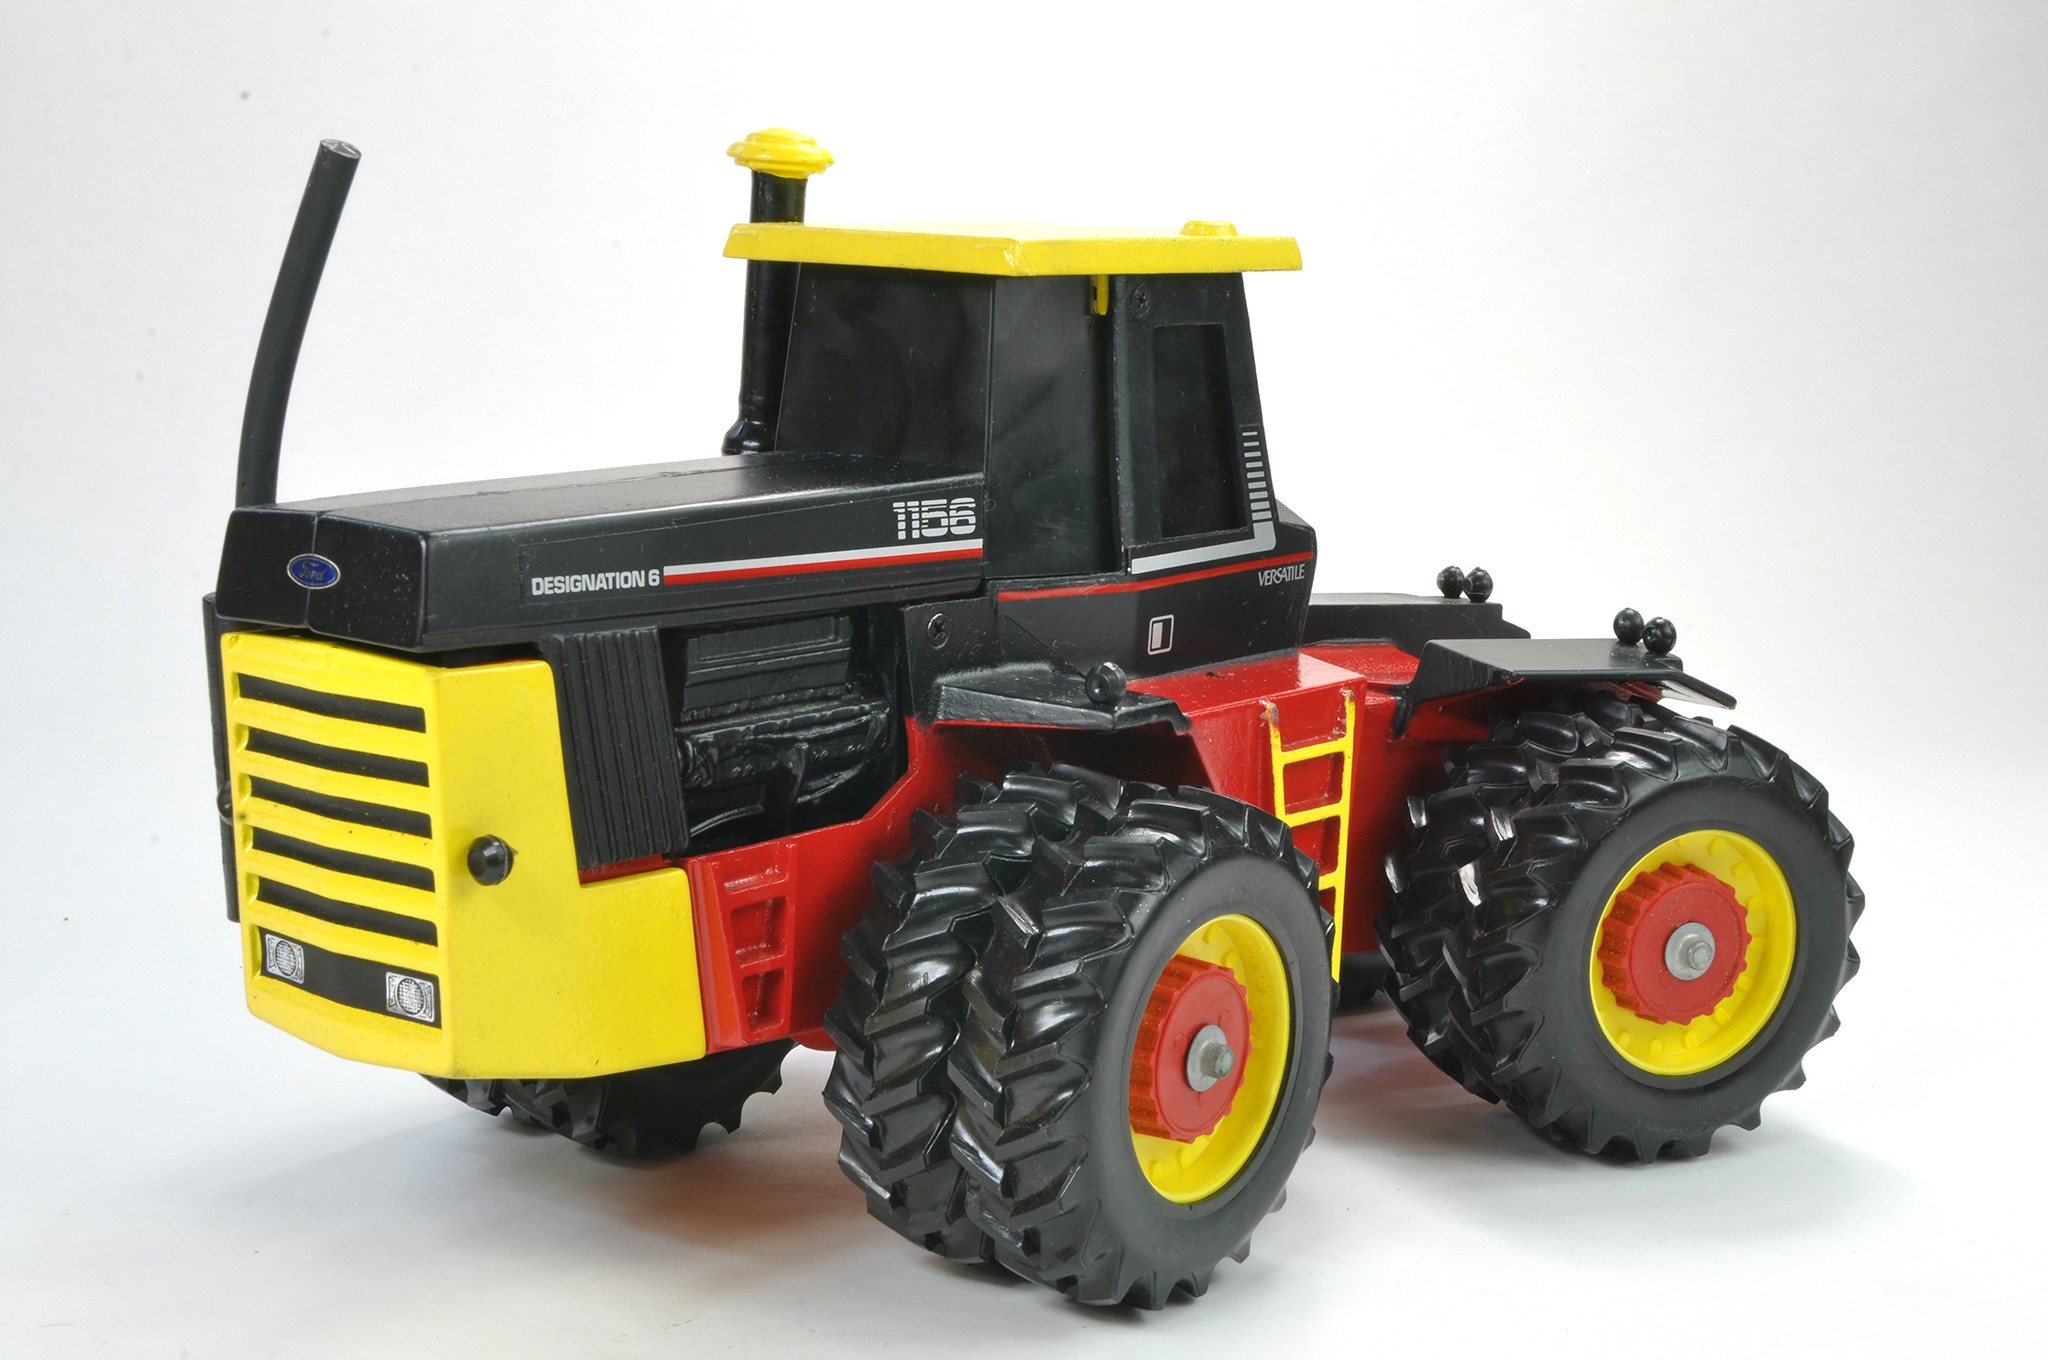 Scale Models 1/16 Model Issue comprising Versatile 1156 Tractor, duals all-round. Generally